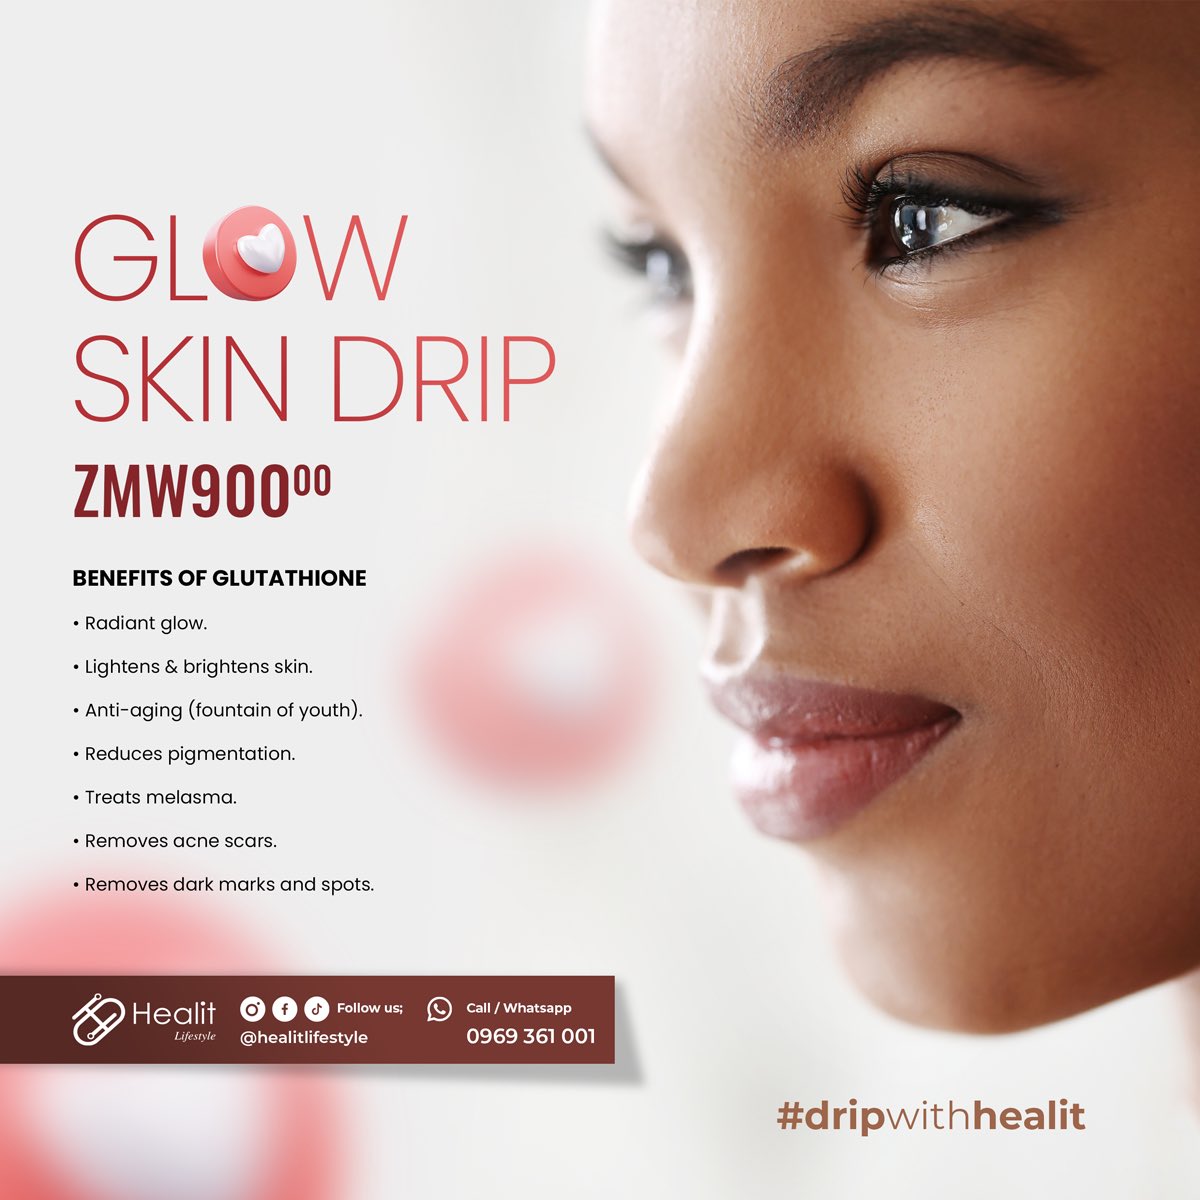 Our #glowskindrip is a combination of glutathione, vitamin c and minerals that generate a healthy glow and improved skin complexion.
📞 0969 361 001 for appointments.

#dripwithhealit #beautyandwellness  #healitlifestyle #glowskin